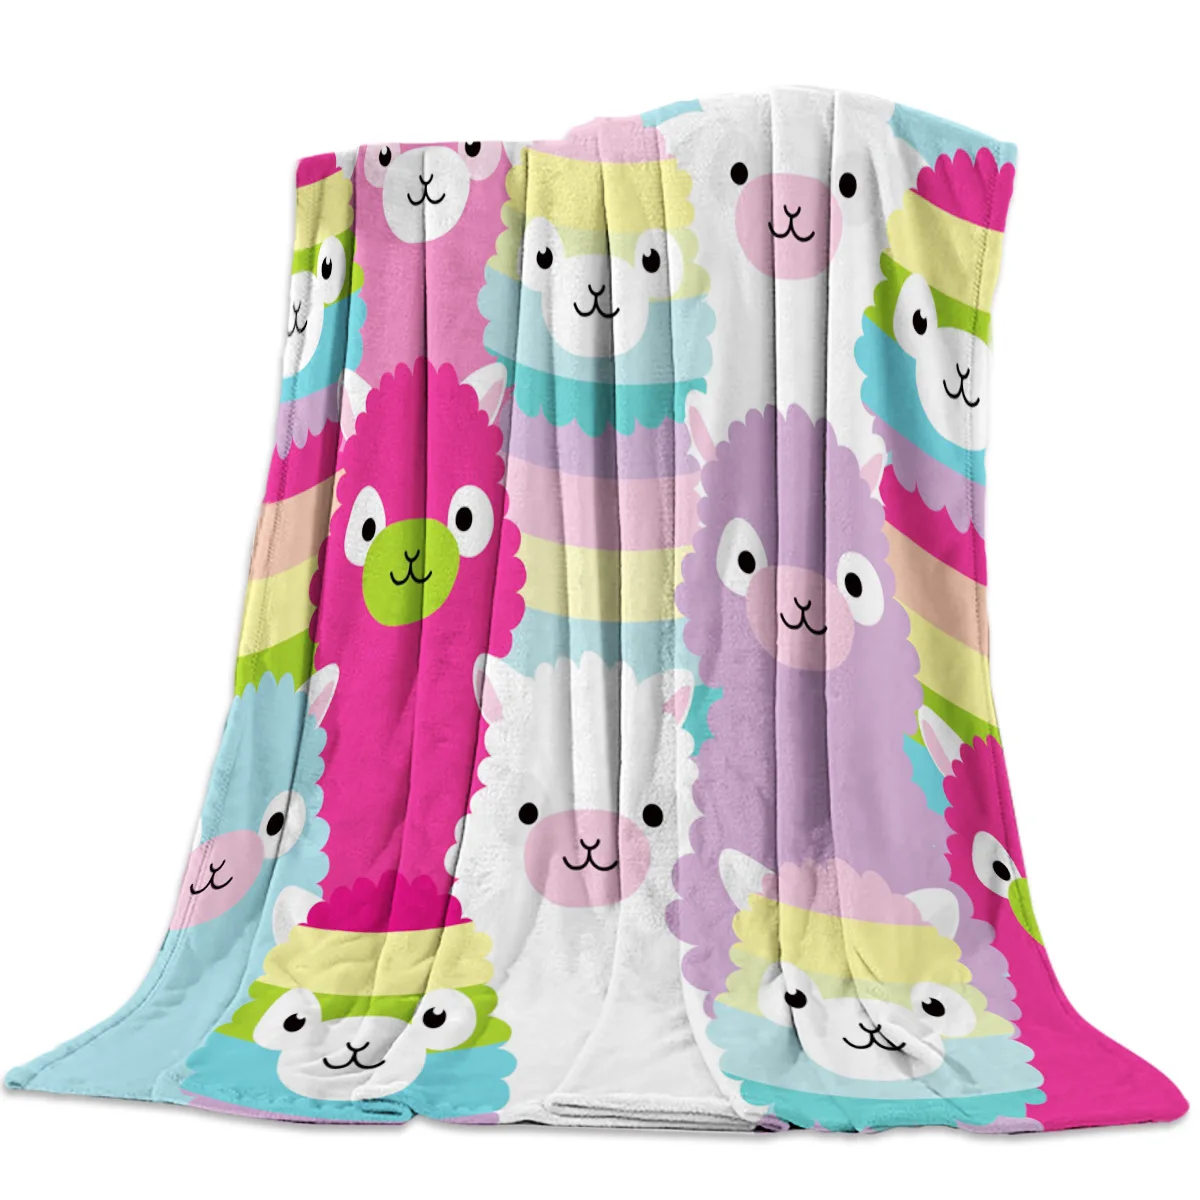 Flannel Blanket for Bed Alpaca Rainbow Cute Colorful Cartoon Throw Blanket Portable Soft Blanket Warm Sofa Bed Sheets